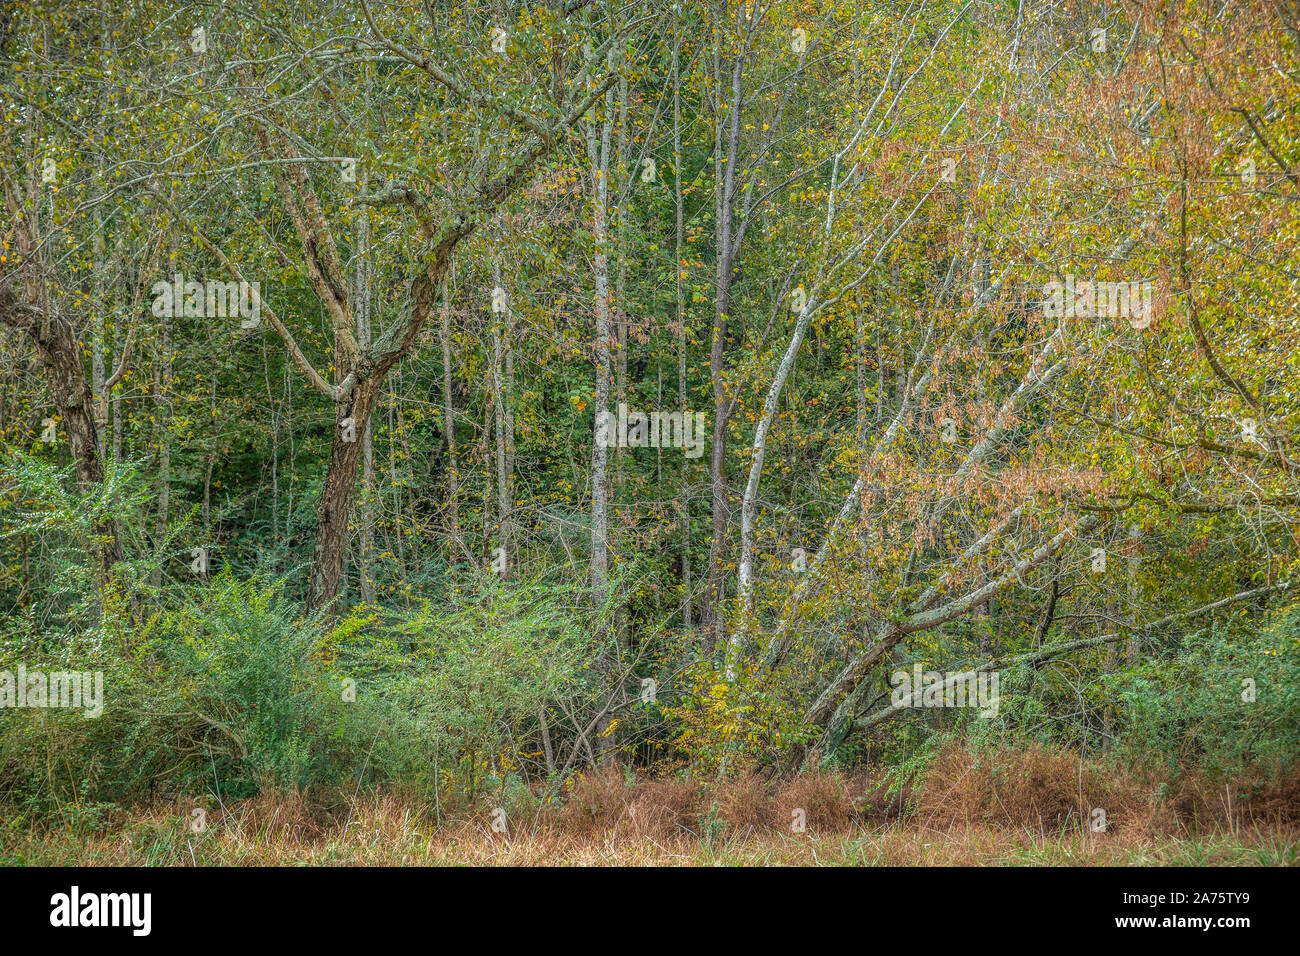 A colorful abstract scene of trees bushes and tall grasses clustered together in autumn on a sunny day Stock Photo